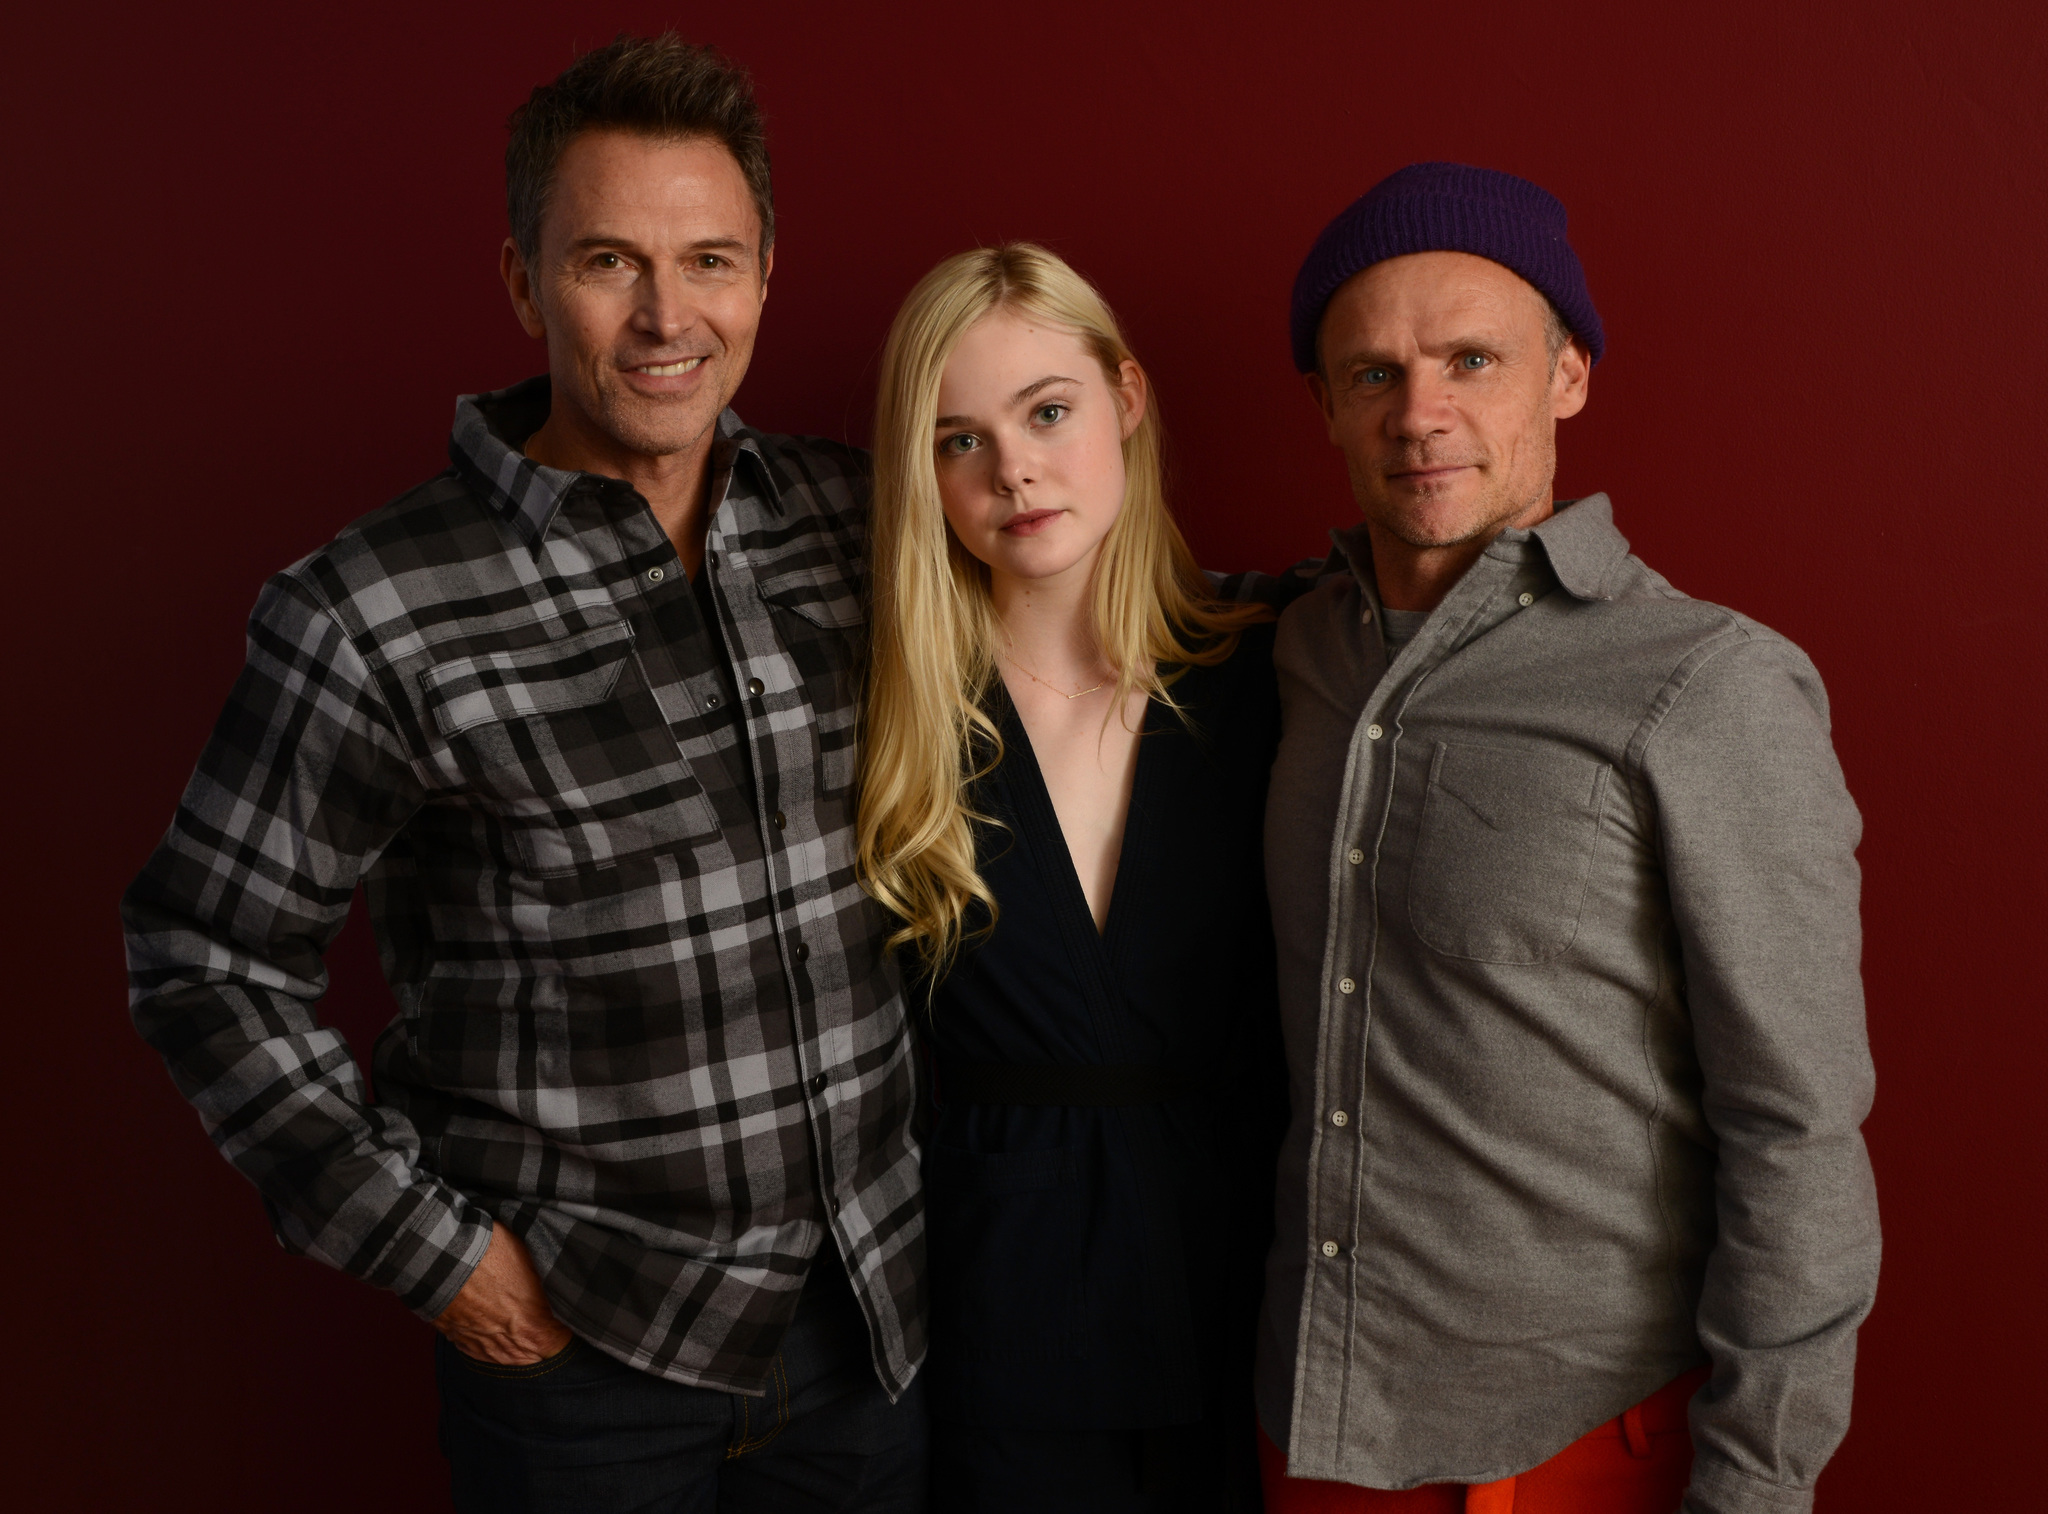 Flea, Elle Fanning and Timothy Daly